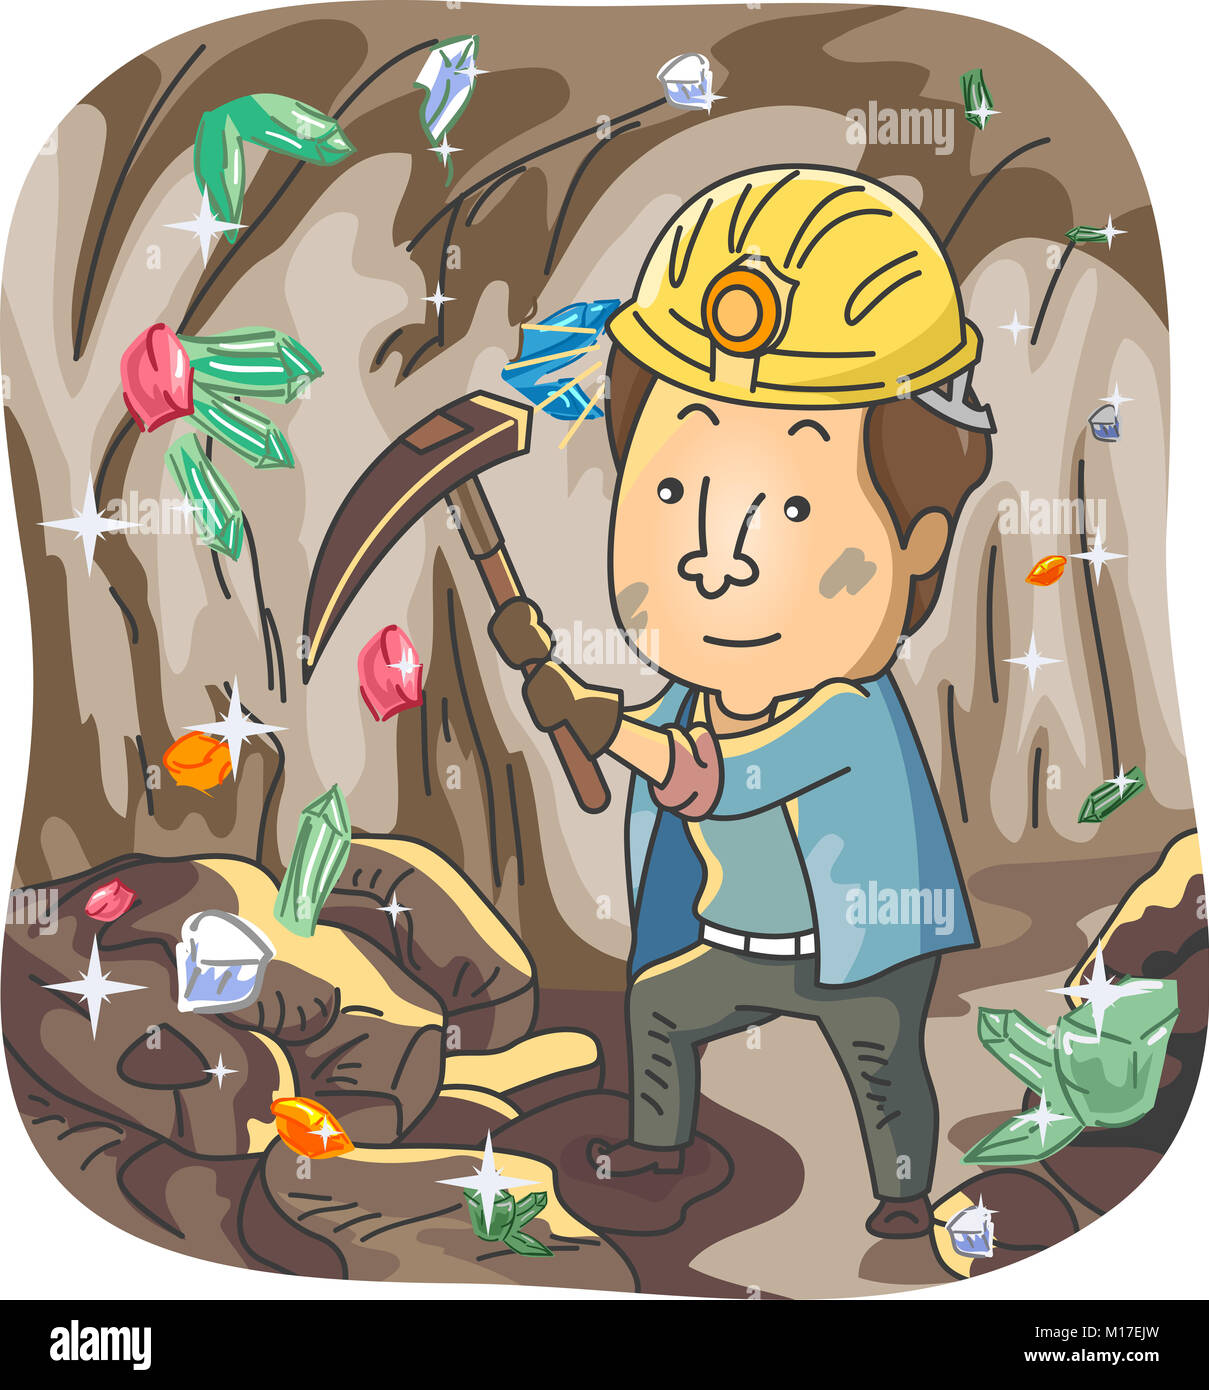 Illustration Featuring a Man Dressed as a Miner Using a Pick Axe to Dig Out Colorful Crystals Stock Photo